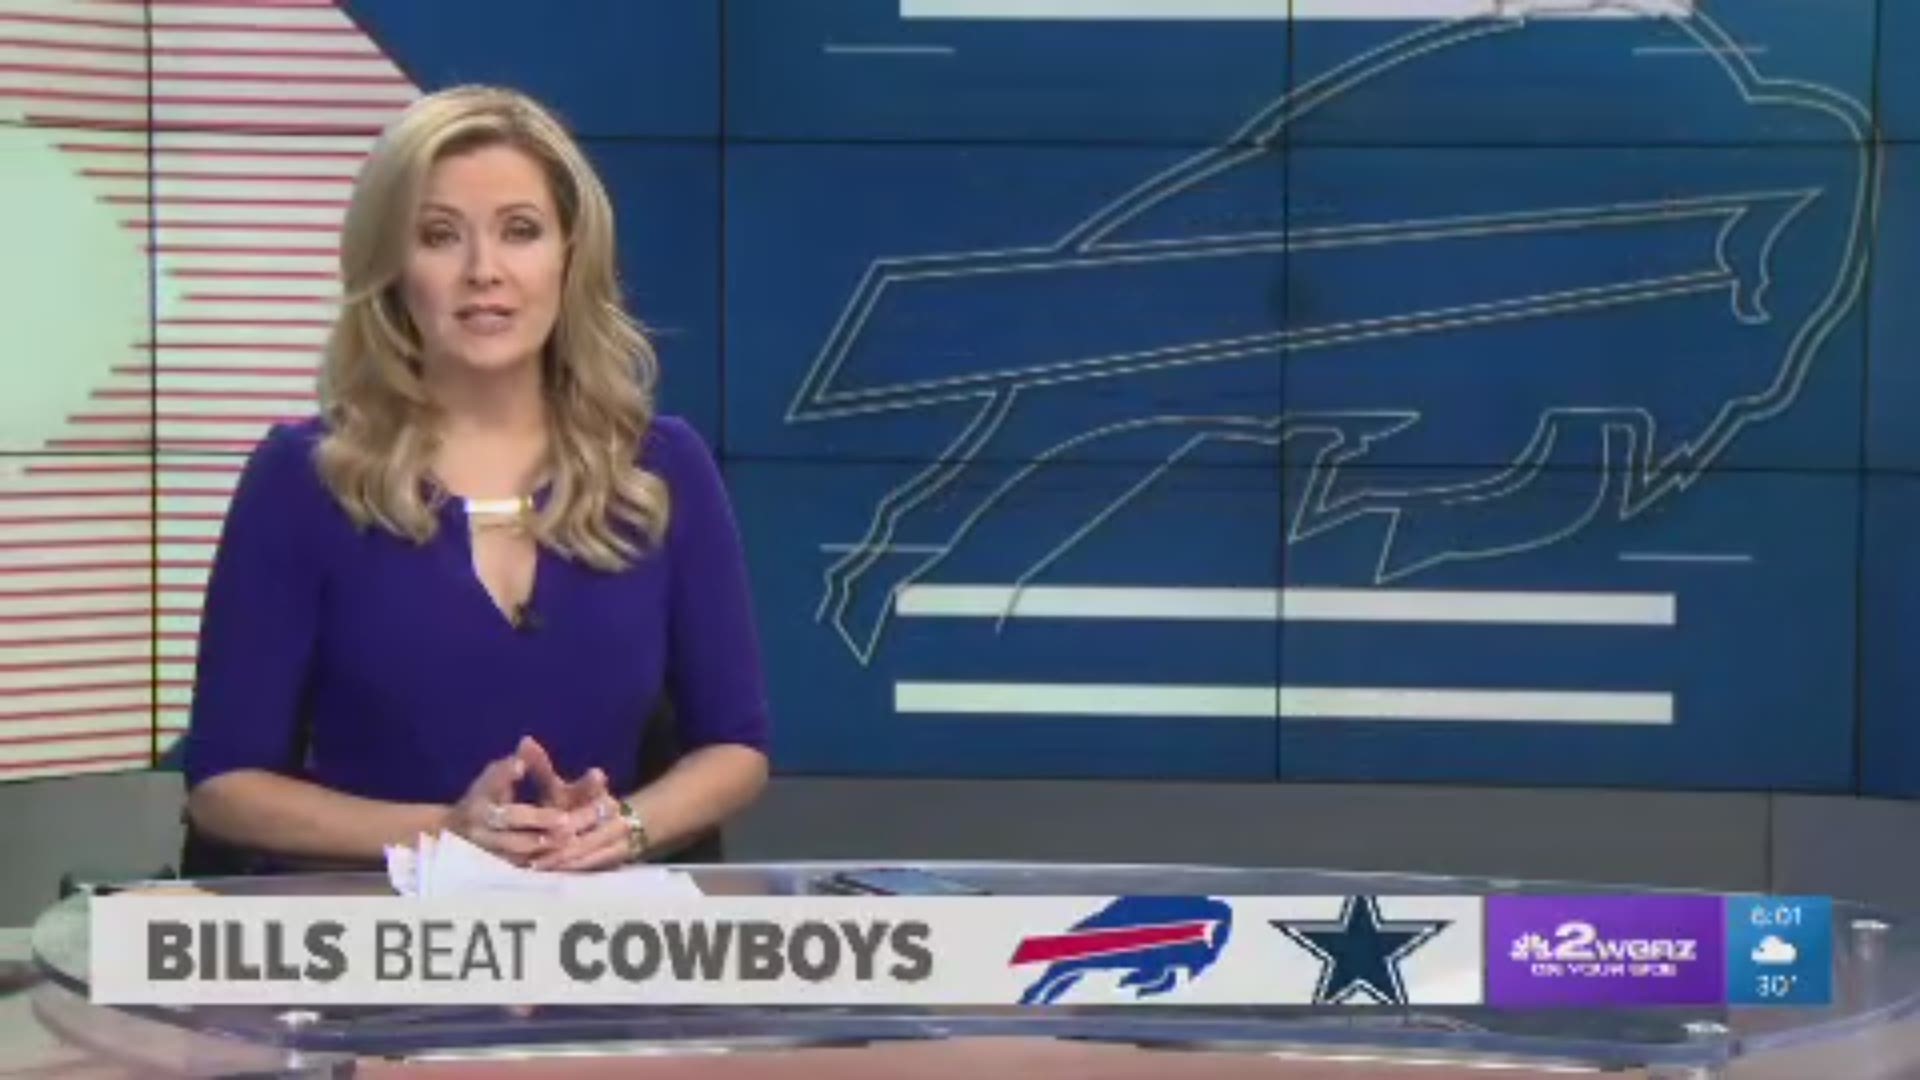 After a 26-15 win over the Cowboys on Thanksgiving, the Bills playoff chances are now better than 90%.